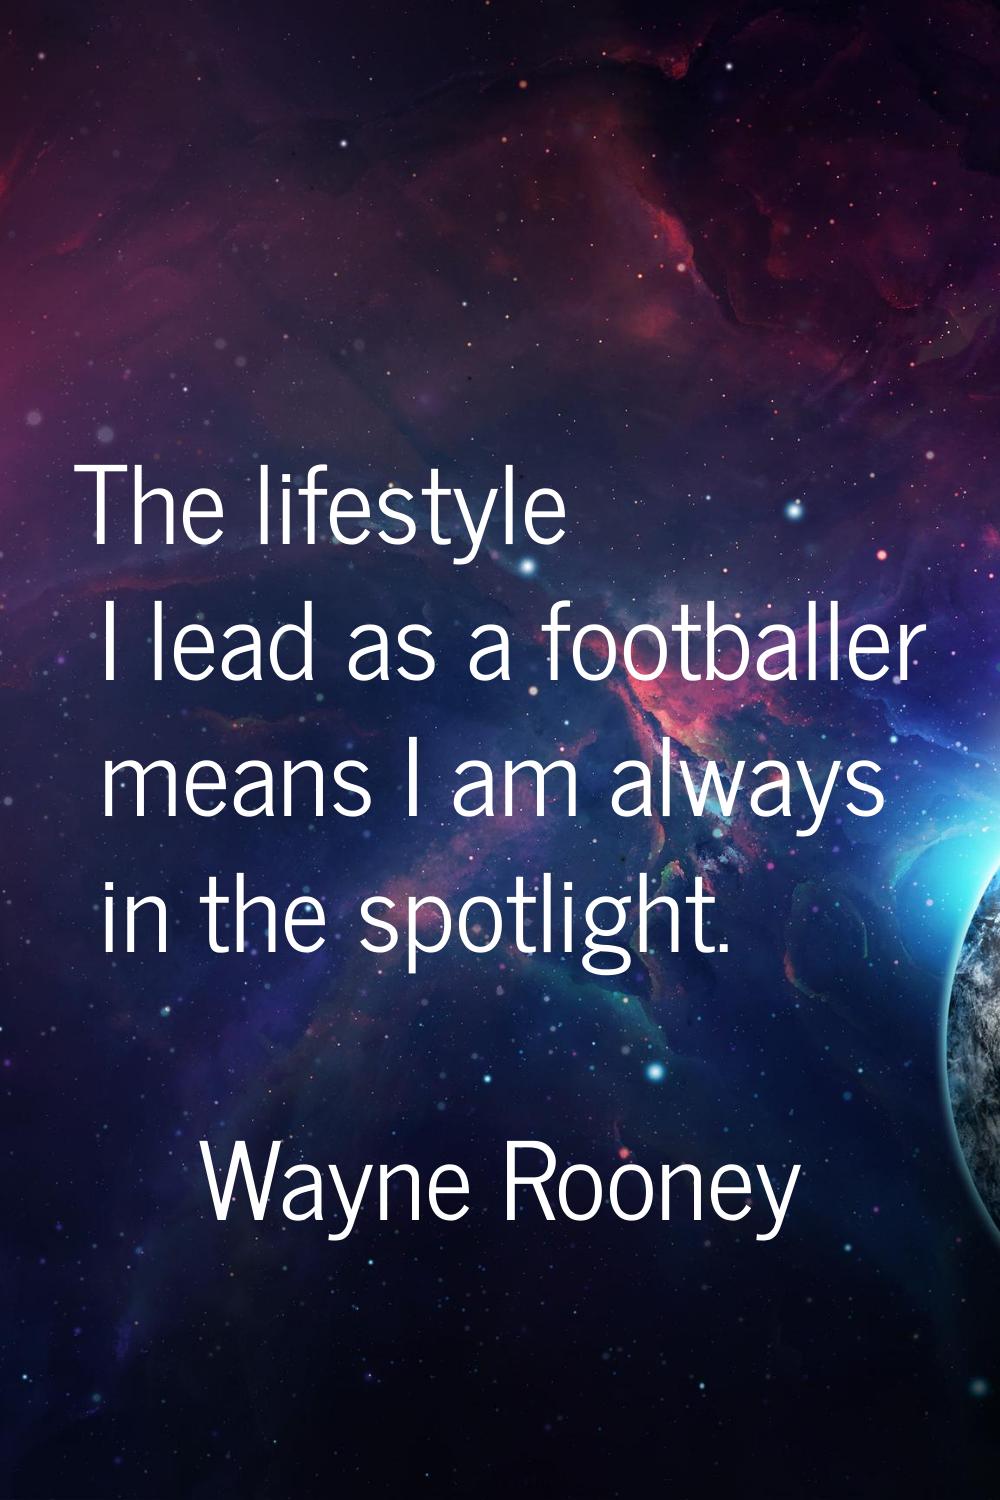 The lifestyle I lead as a footballer means I am always in the spotlight.